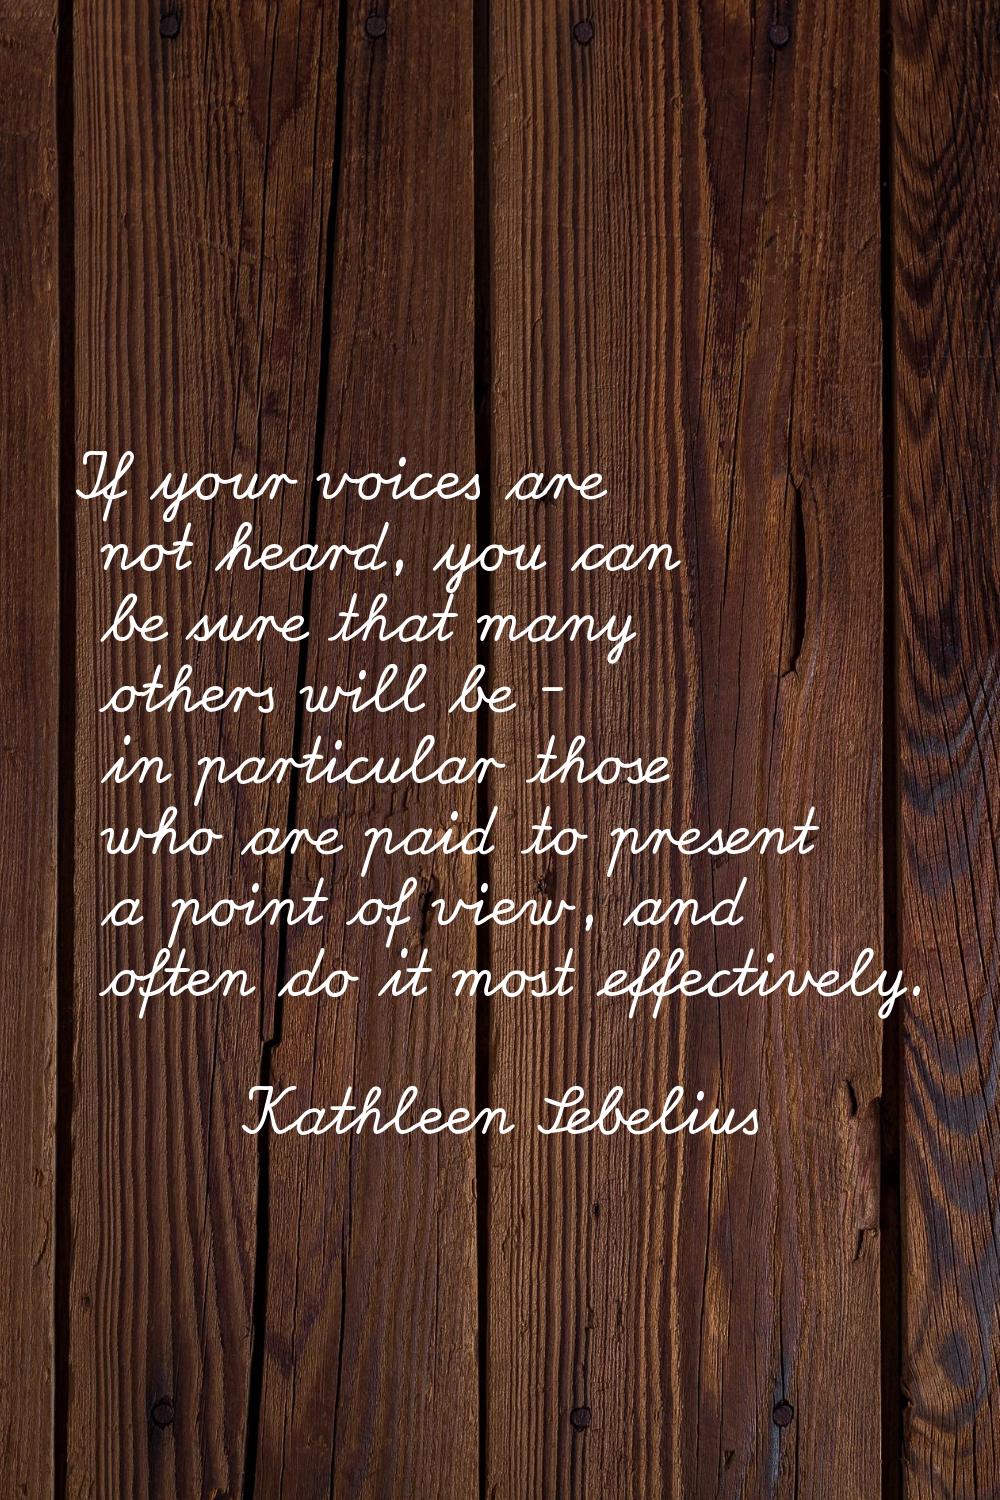 If your voices are not heard, you can be sure that many others will be - in particular those who ar